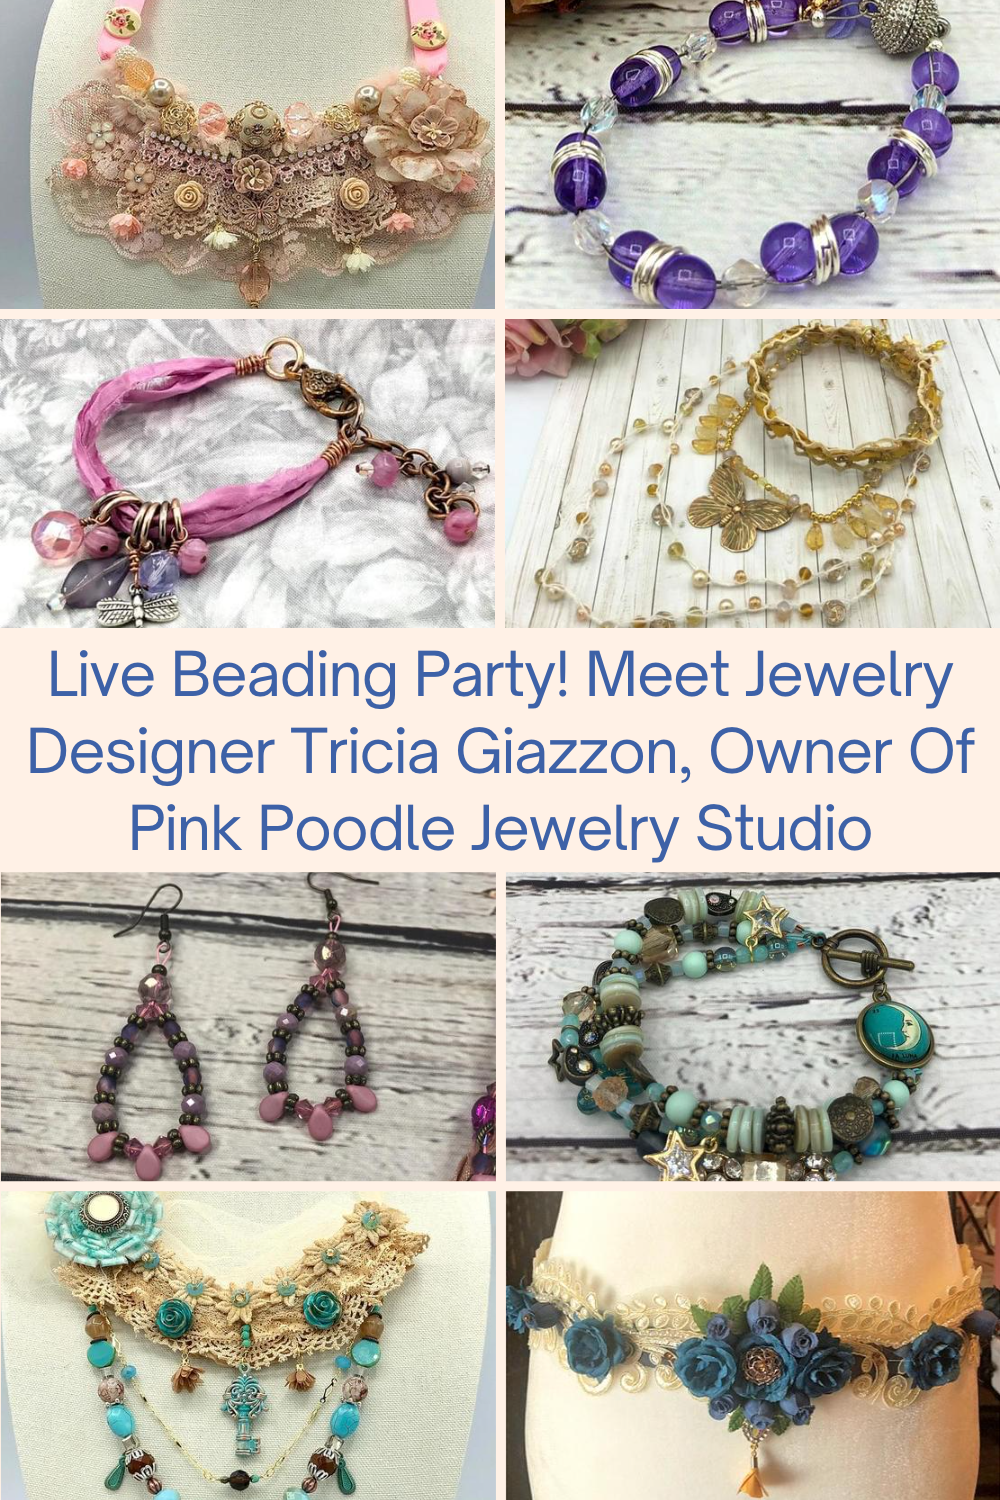 Live Beading Party! Meet Jewelry Designer Tricia Giazzon, Owner Of Pink Poodle Jewelry Studio Collage